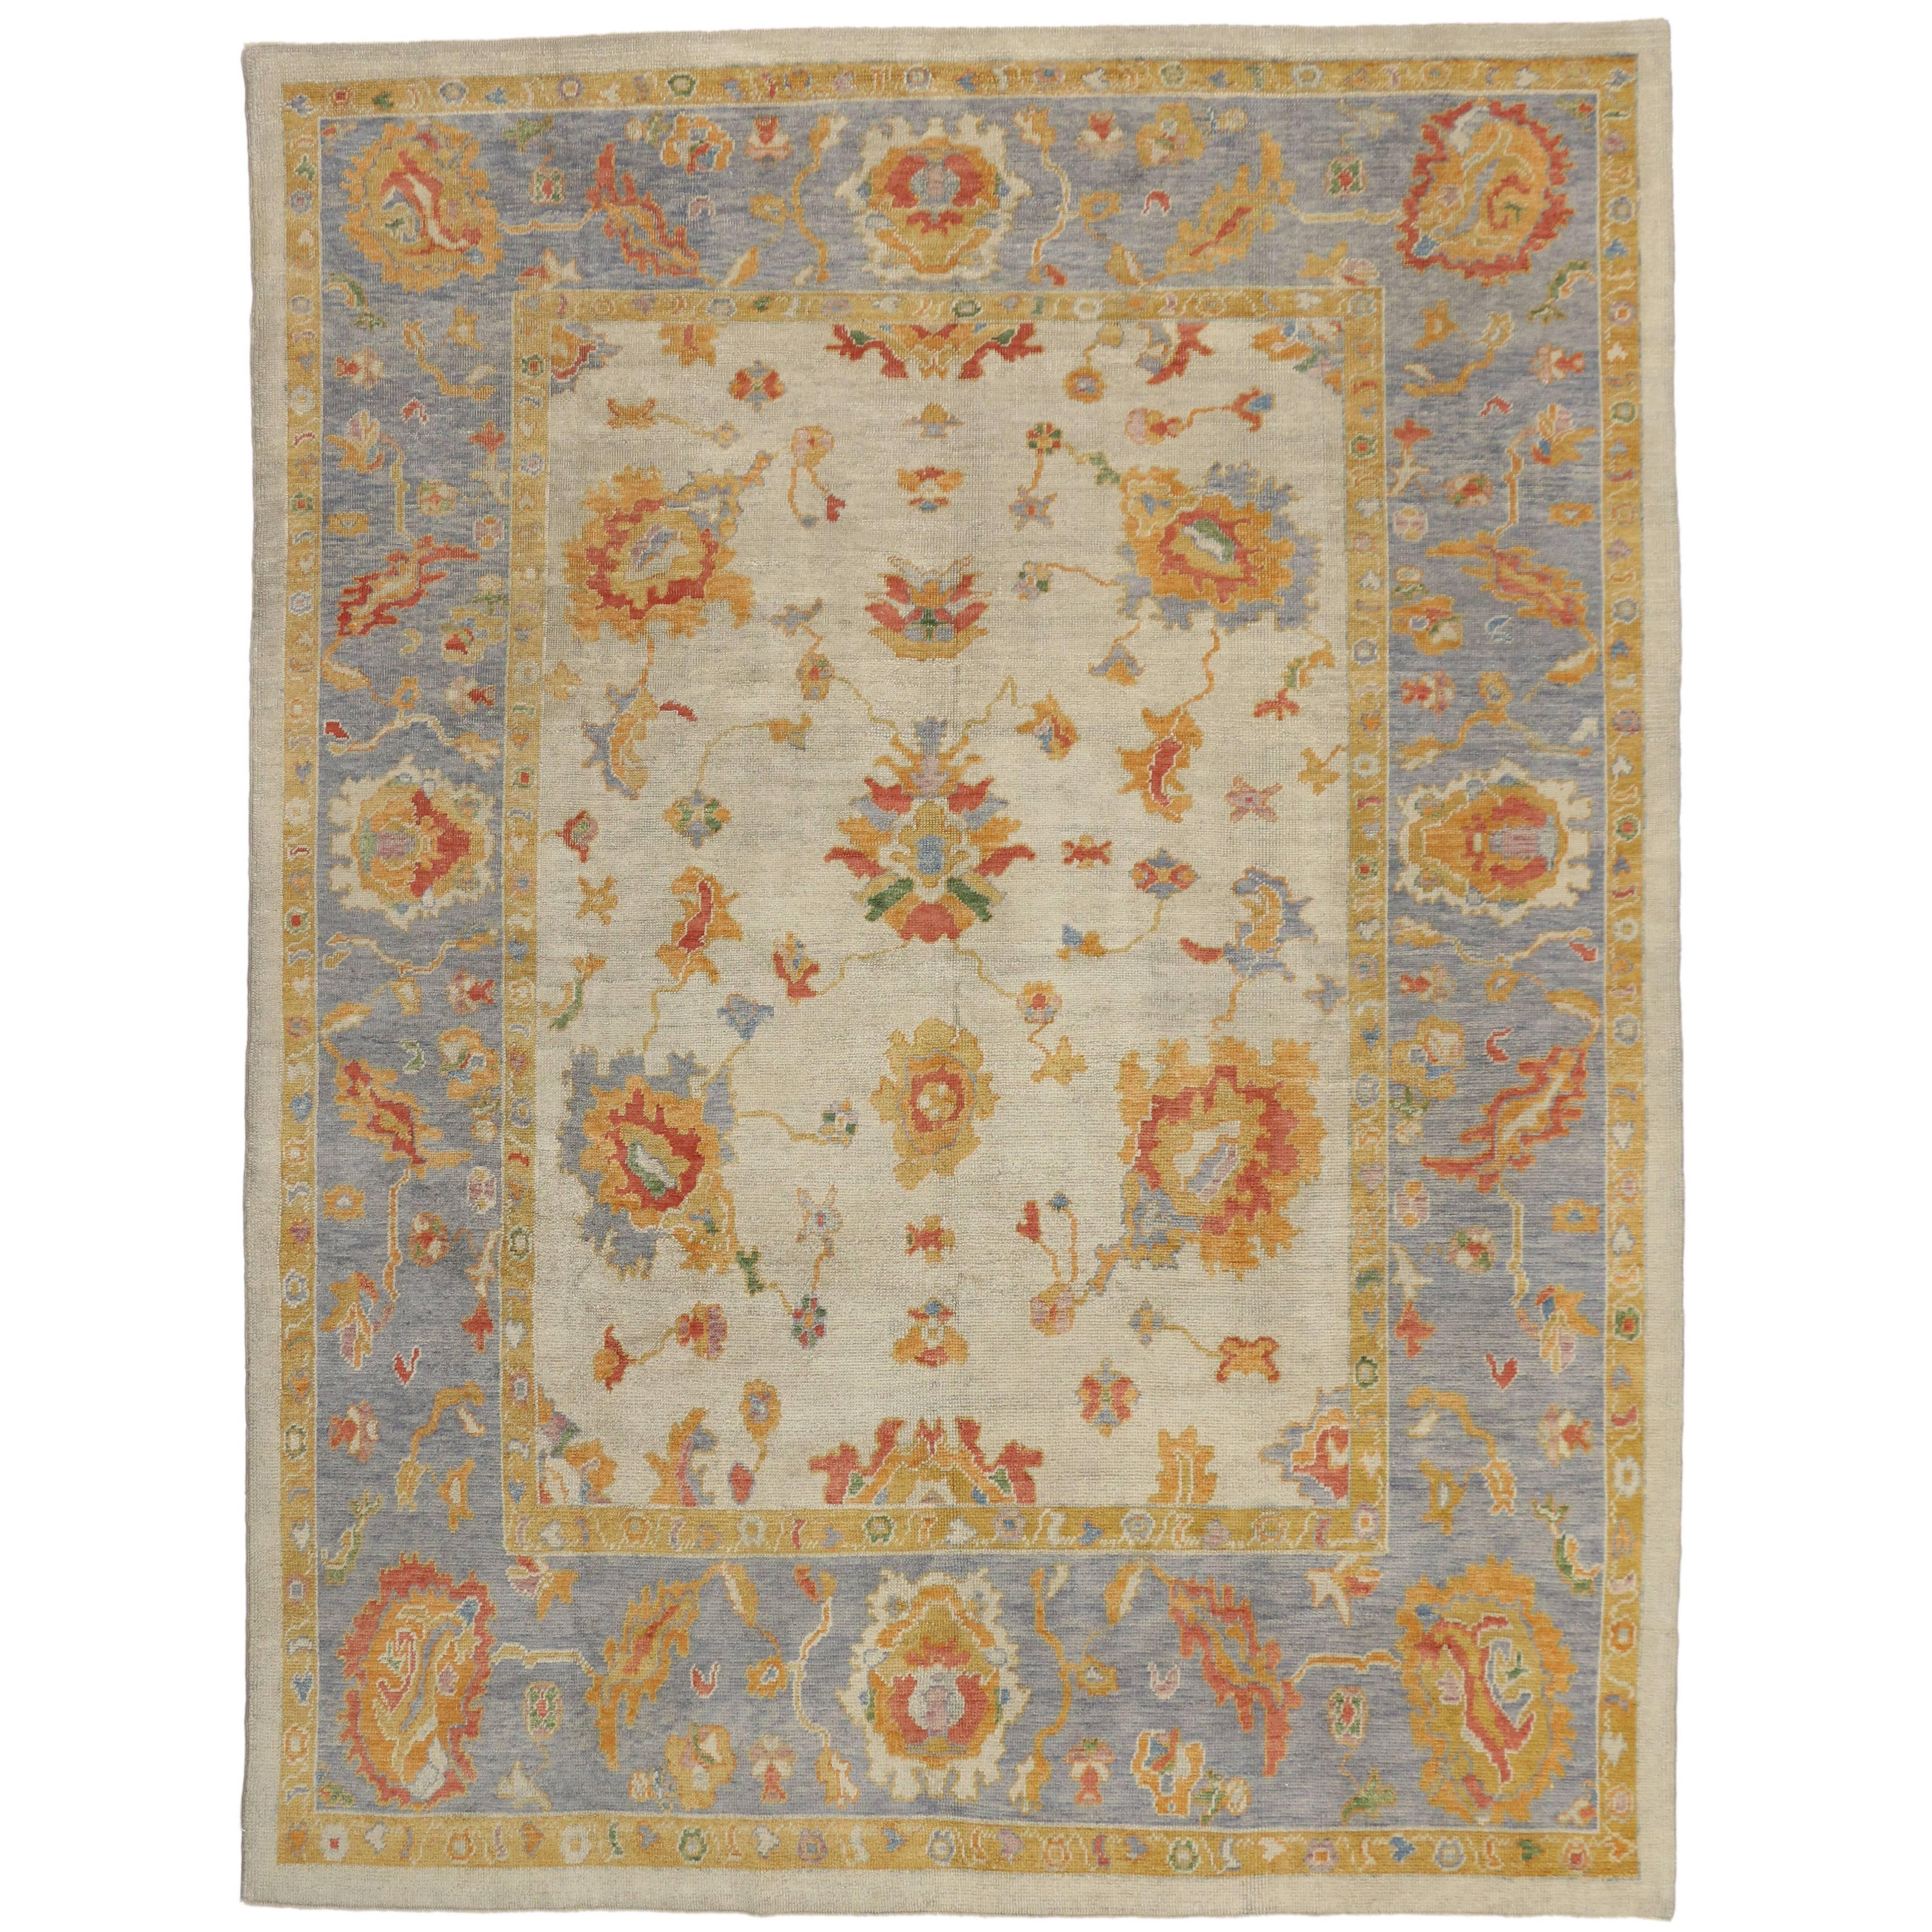 Contemporary Turkish Oushak Rug in Pastel Colors with Tribal Boho Chic Style For Sale